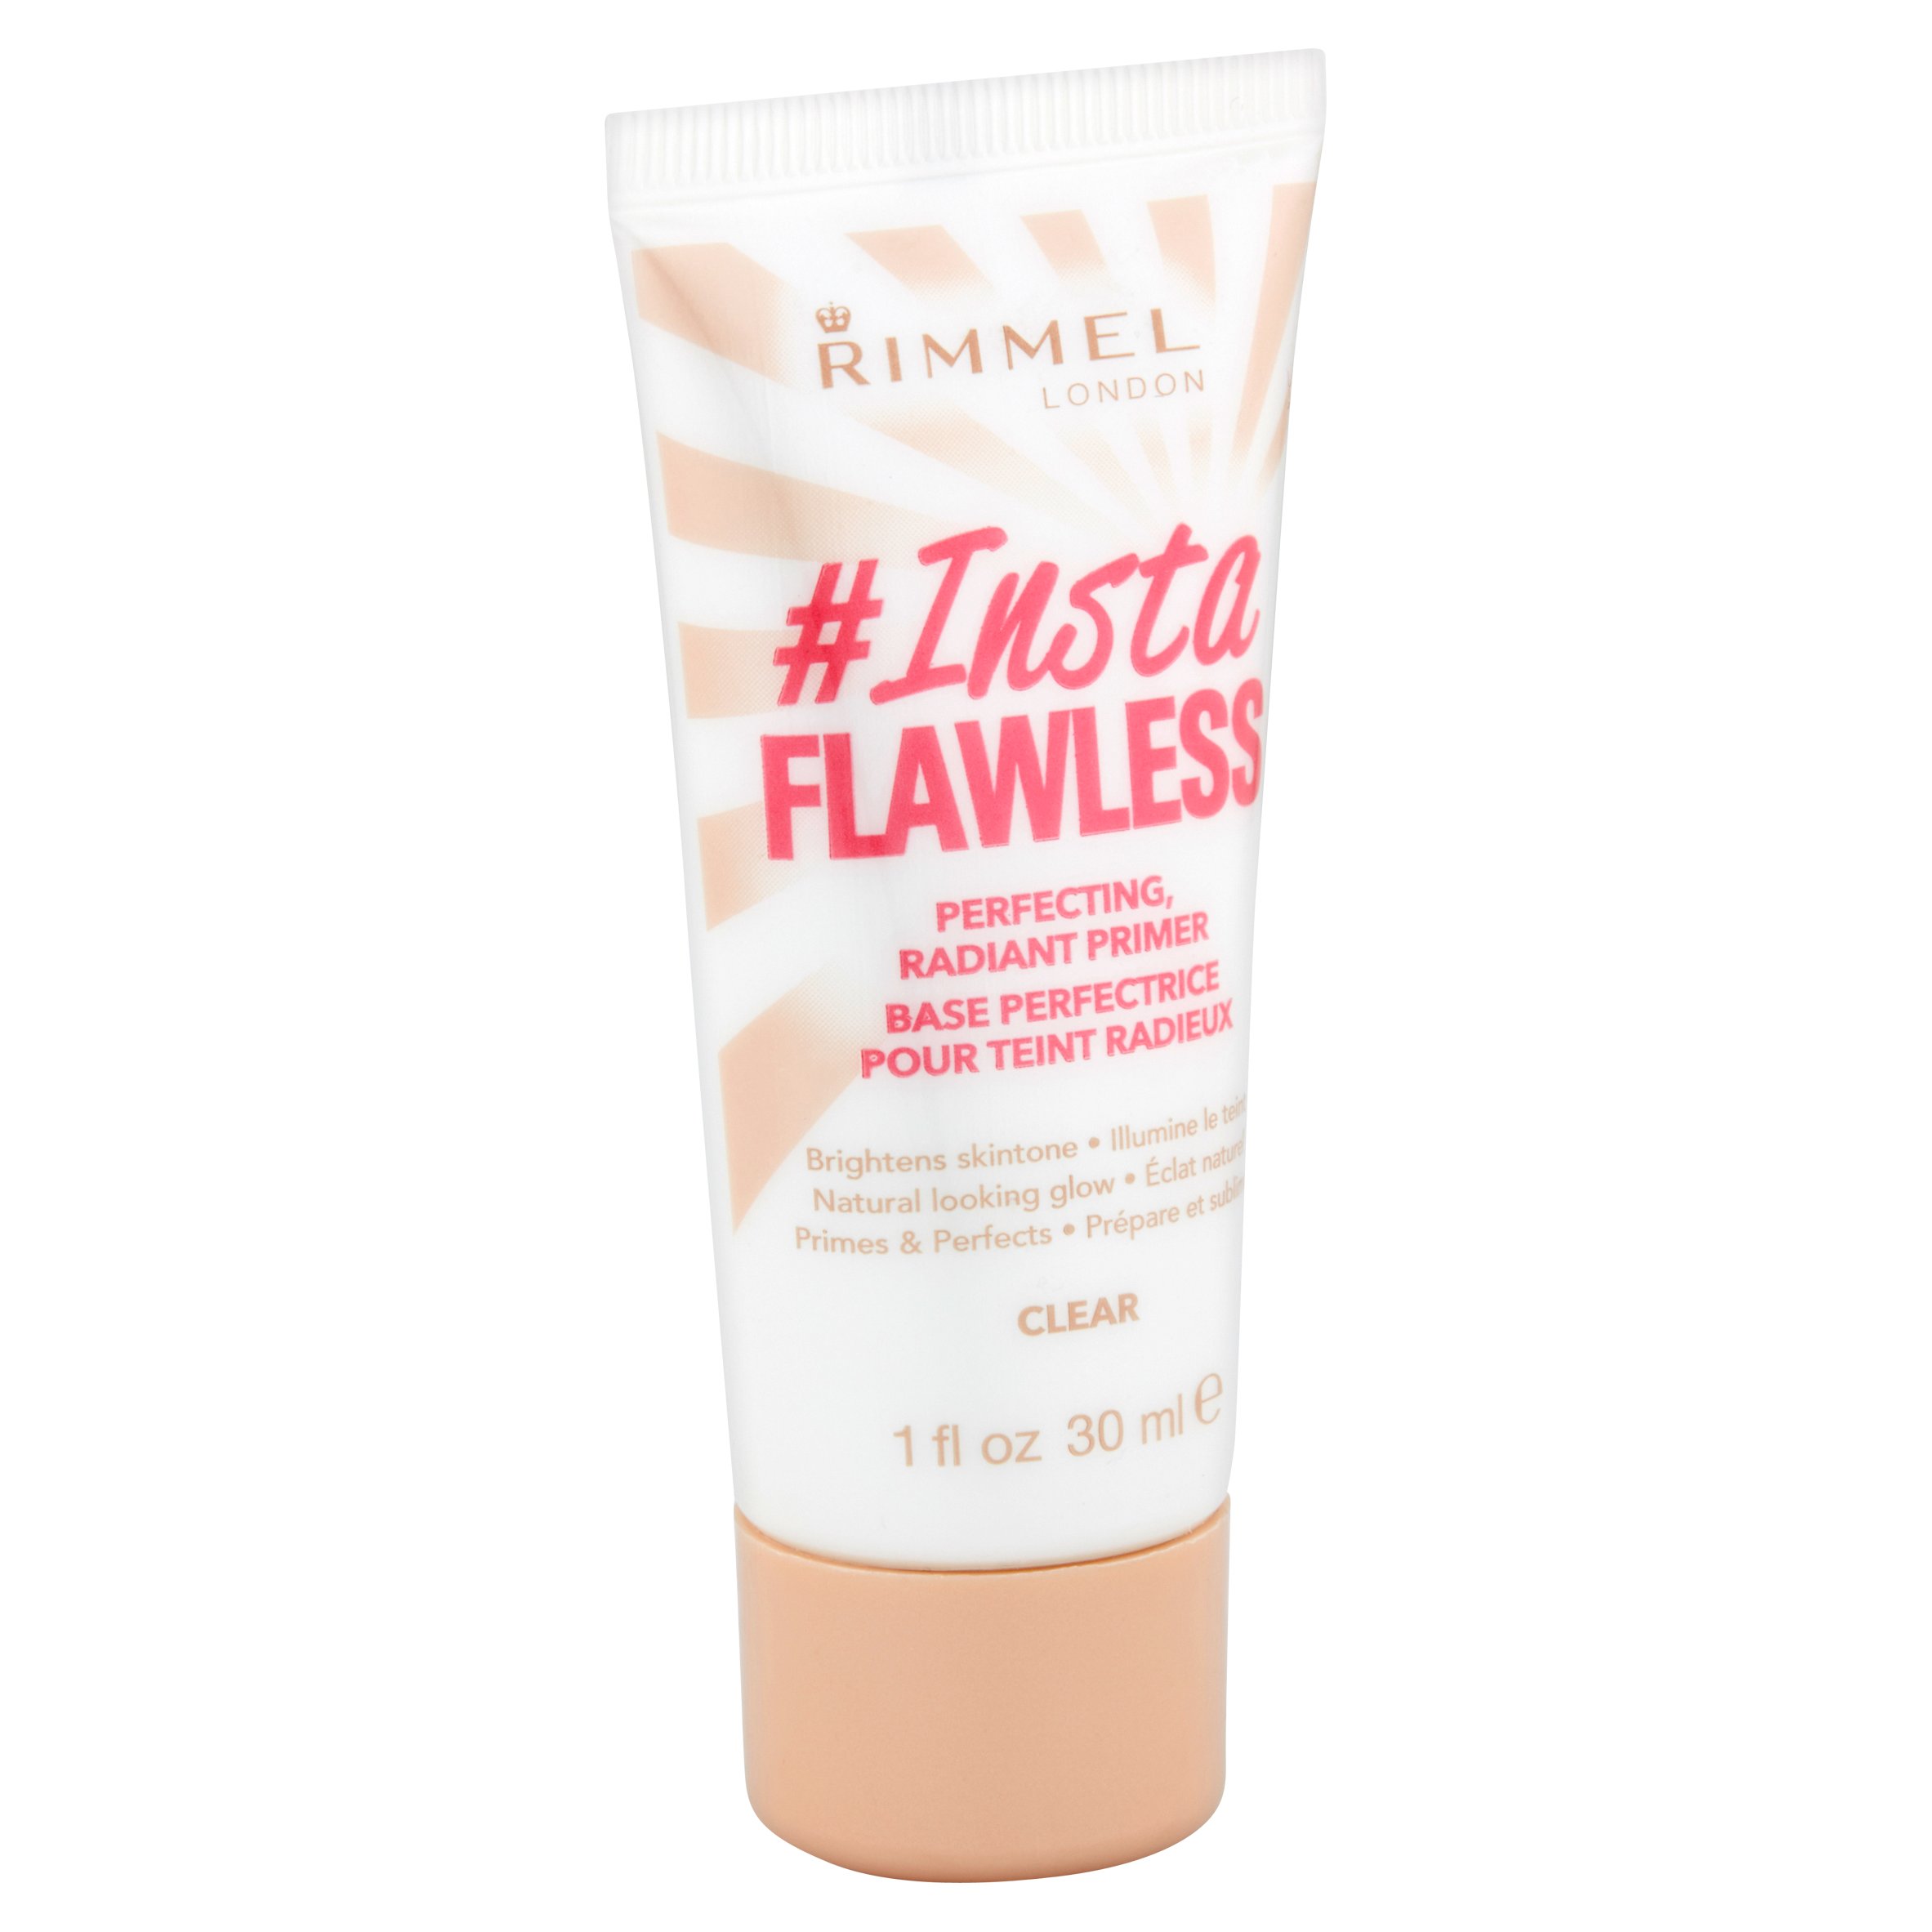 Rimmel London #Insta Flawless Perfecting Radiant Primer, Clear - image 2 of 4